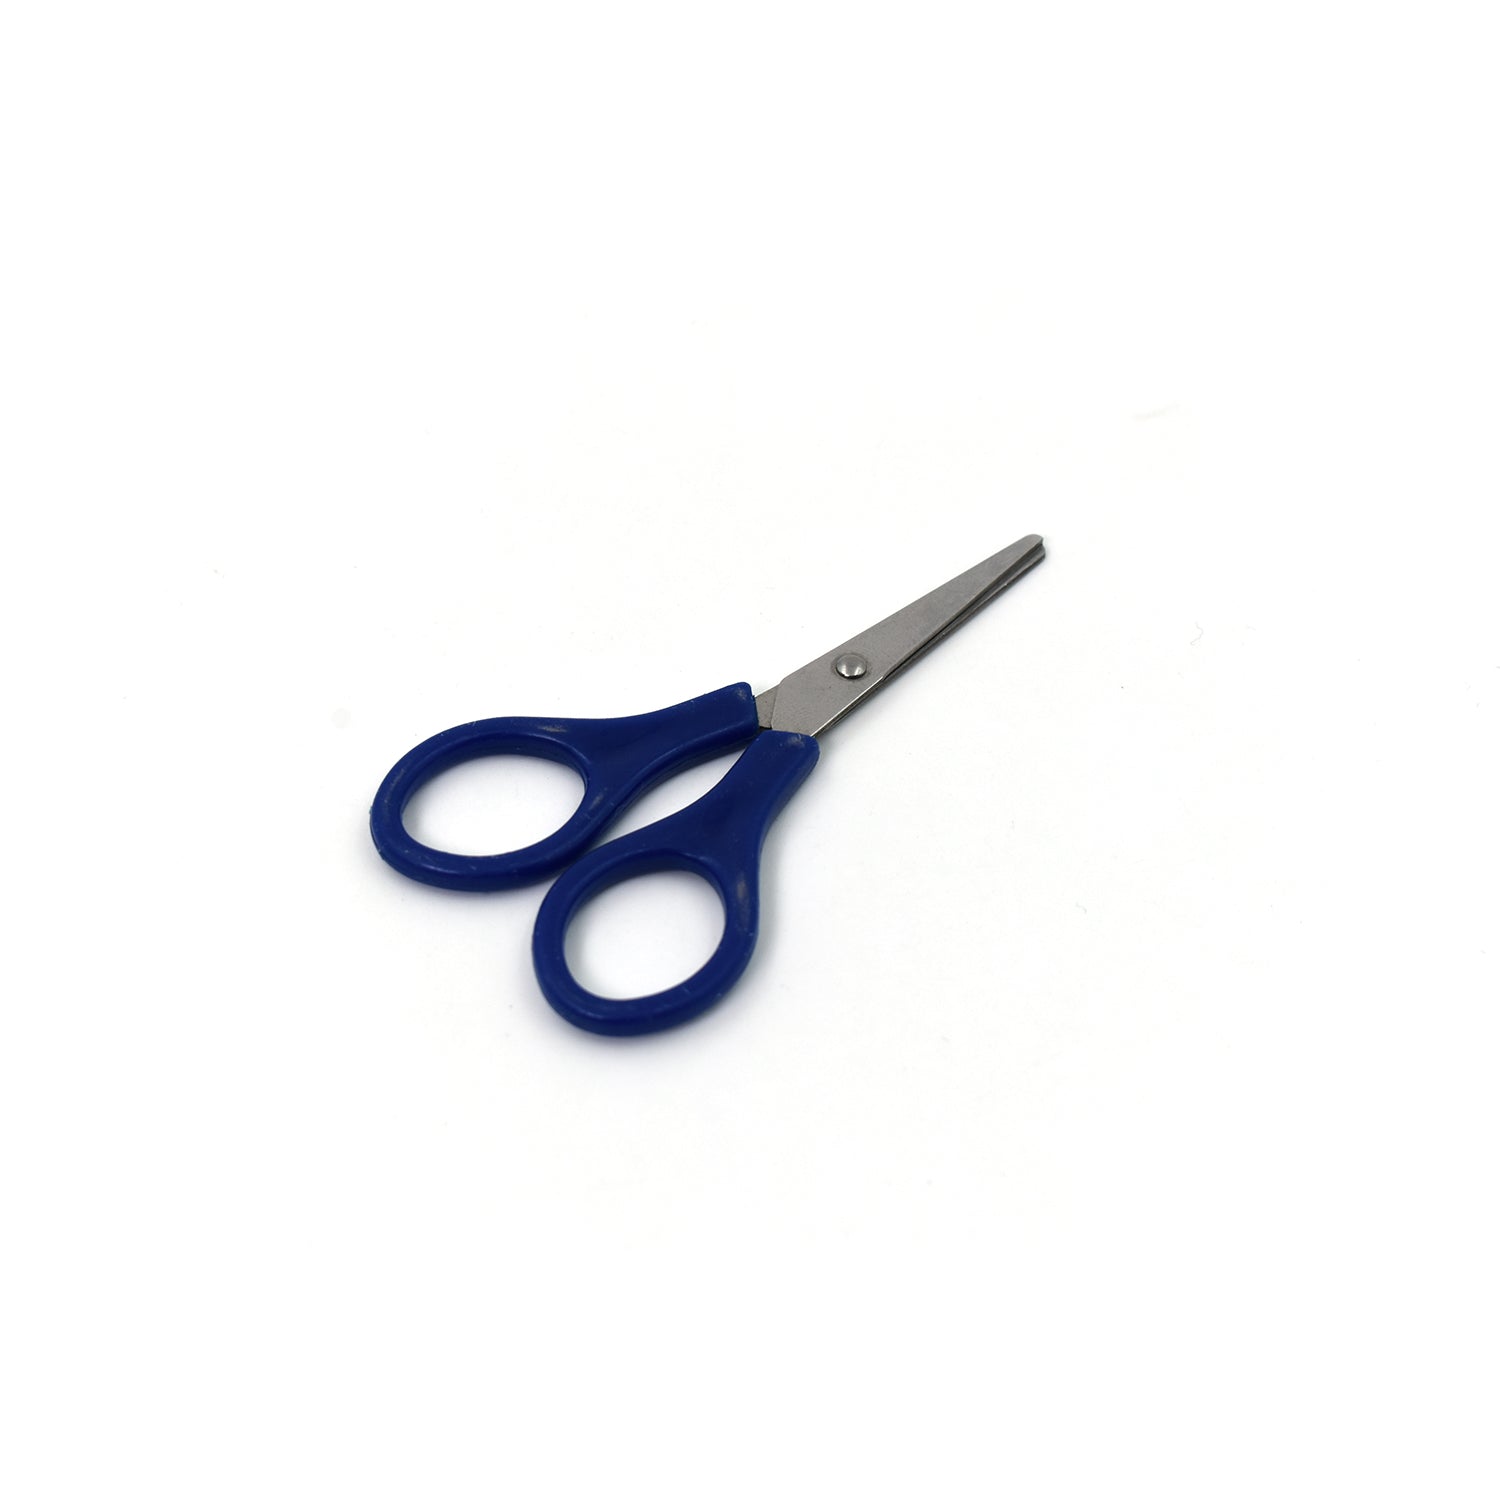 7622 cn Scissor For Cutting And Designing Purposes By Students And All Etc. DeoDap